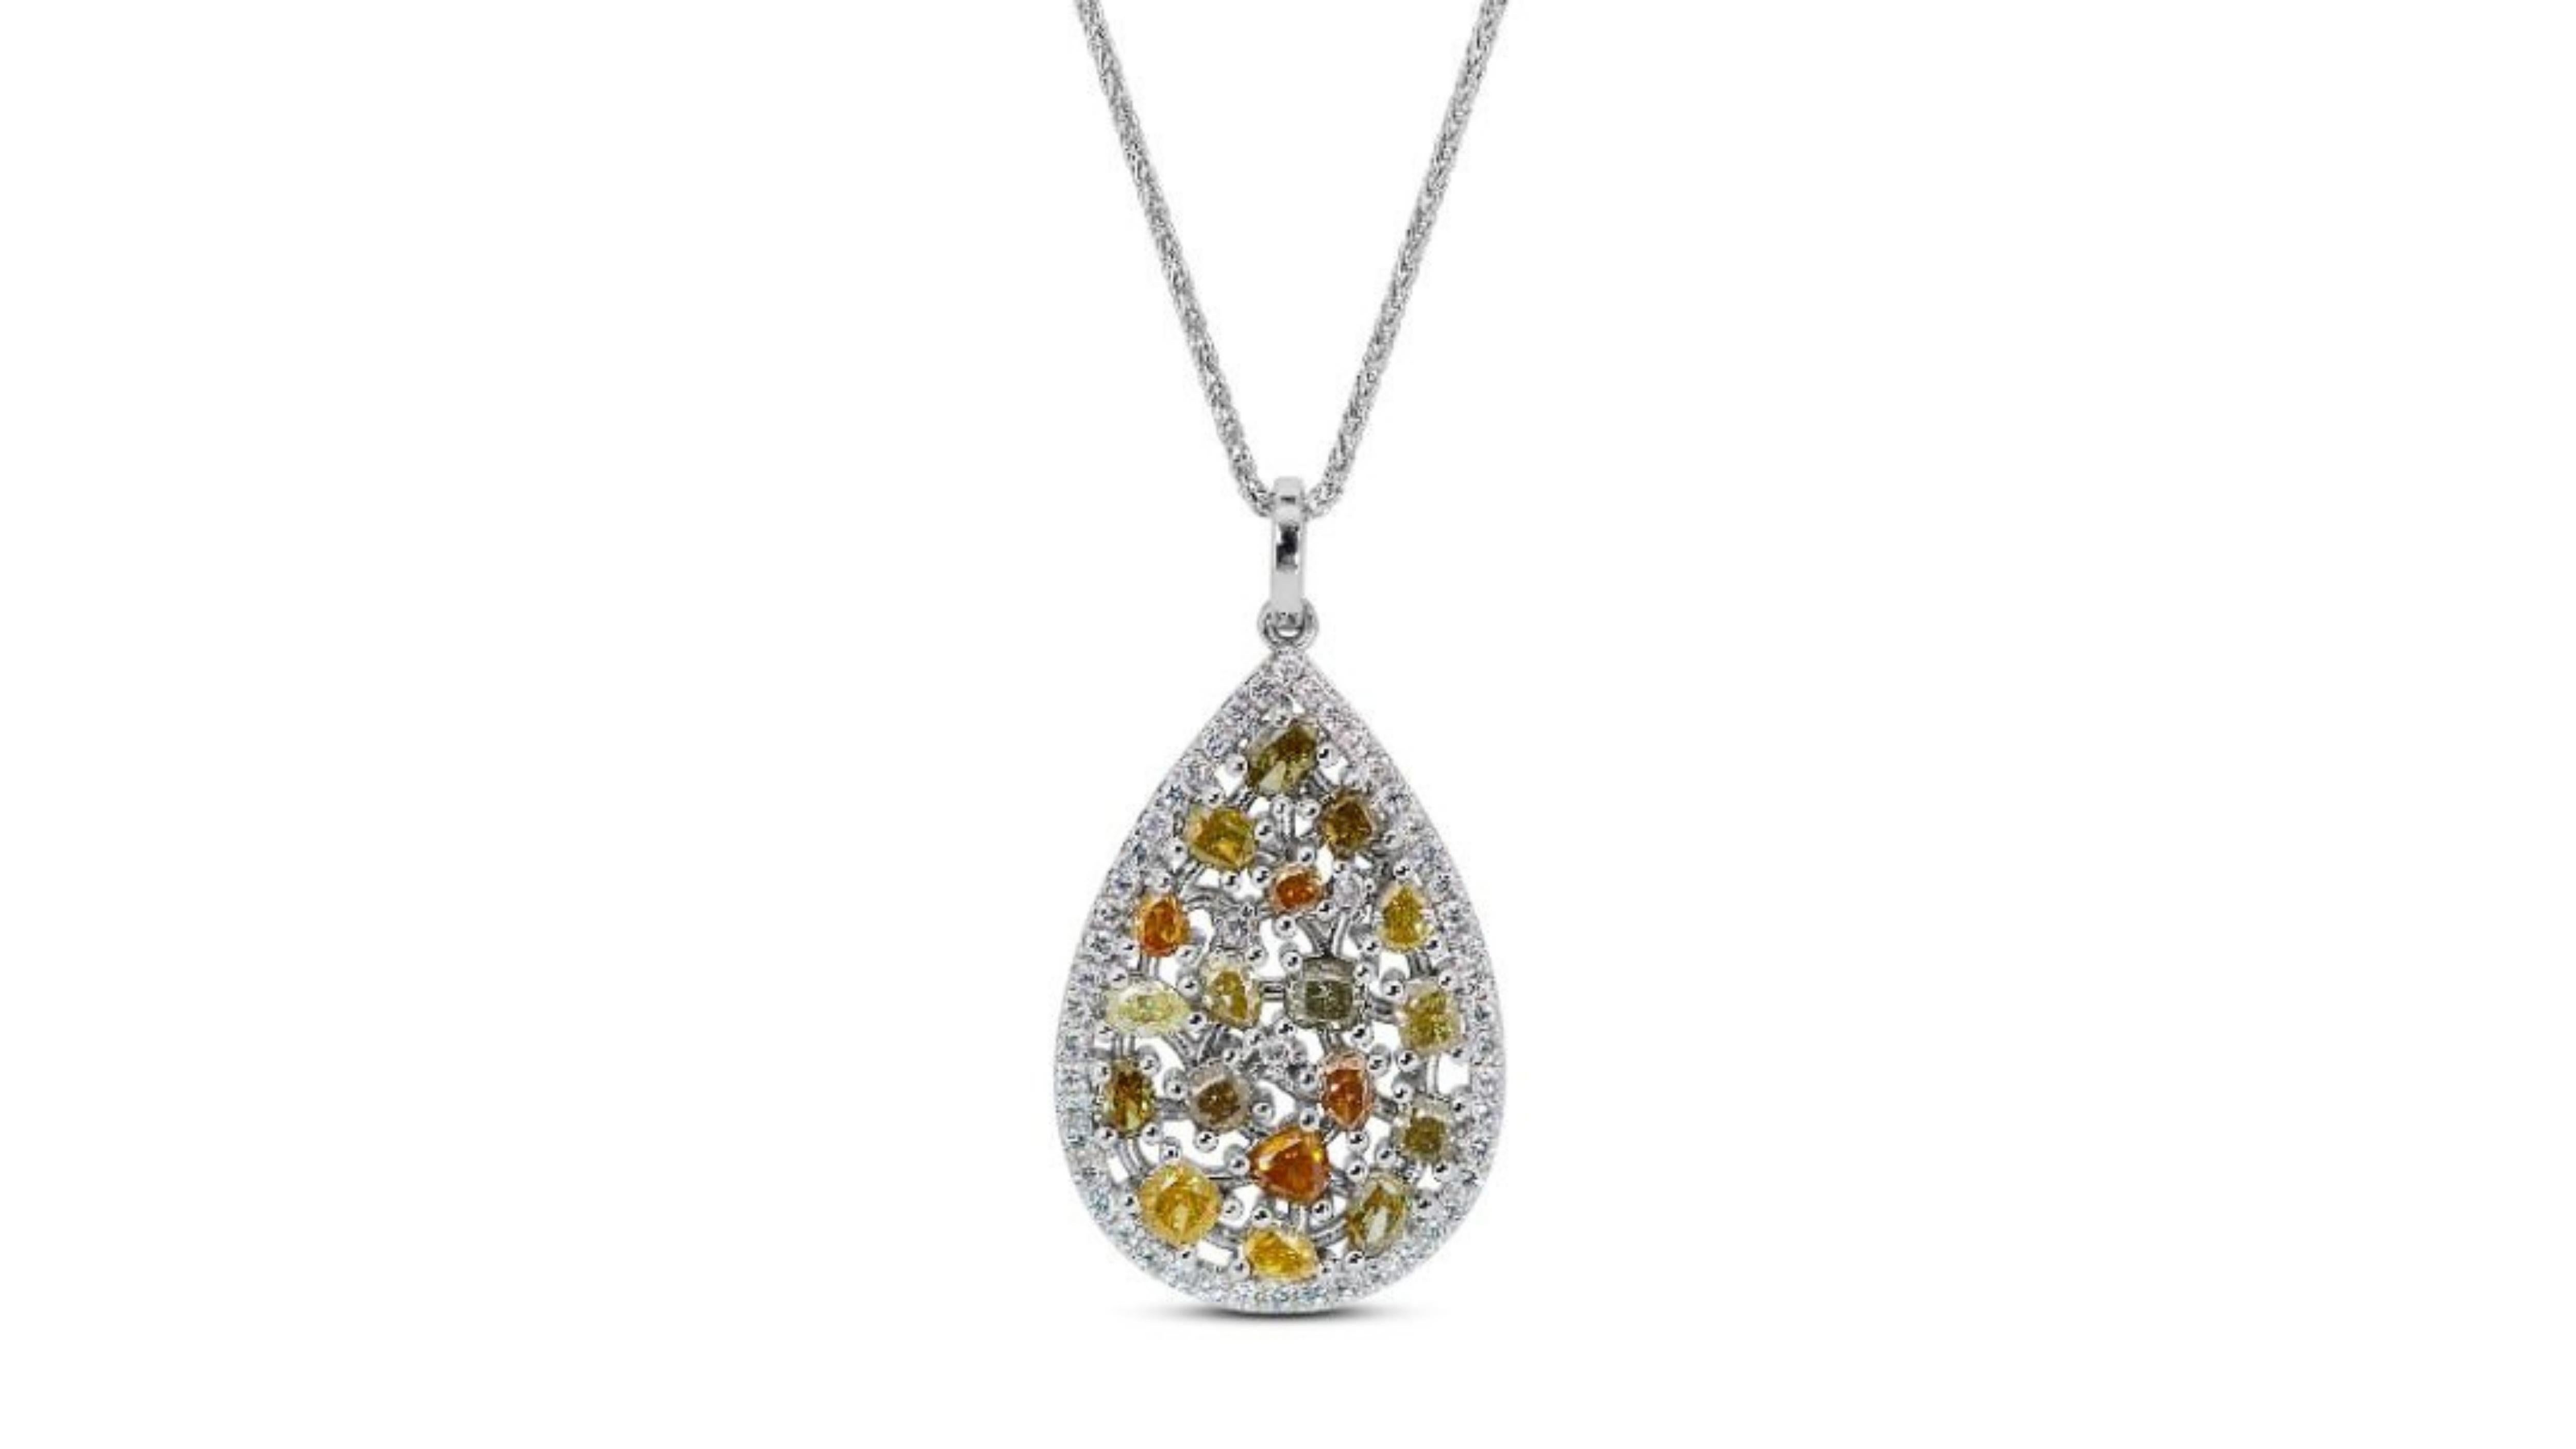 Glamorous 2.17ct. Mixed Cut Stud Diamond Necklace For Sale 4